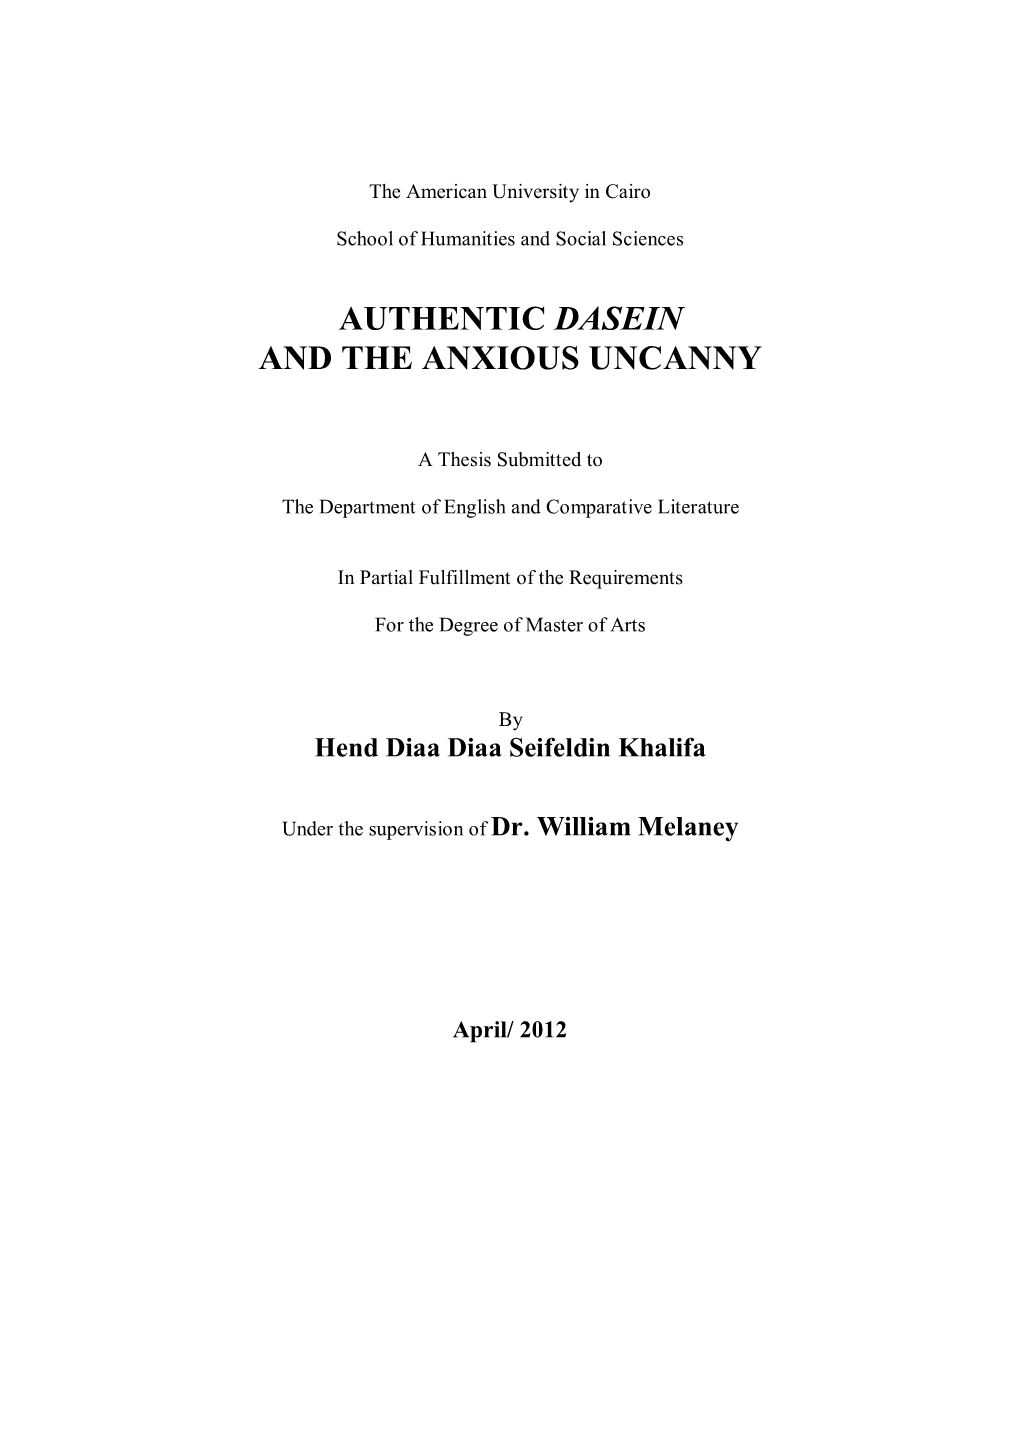 Authentic Dasein and the Anxious Uncanny